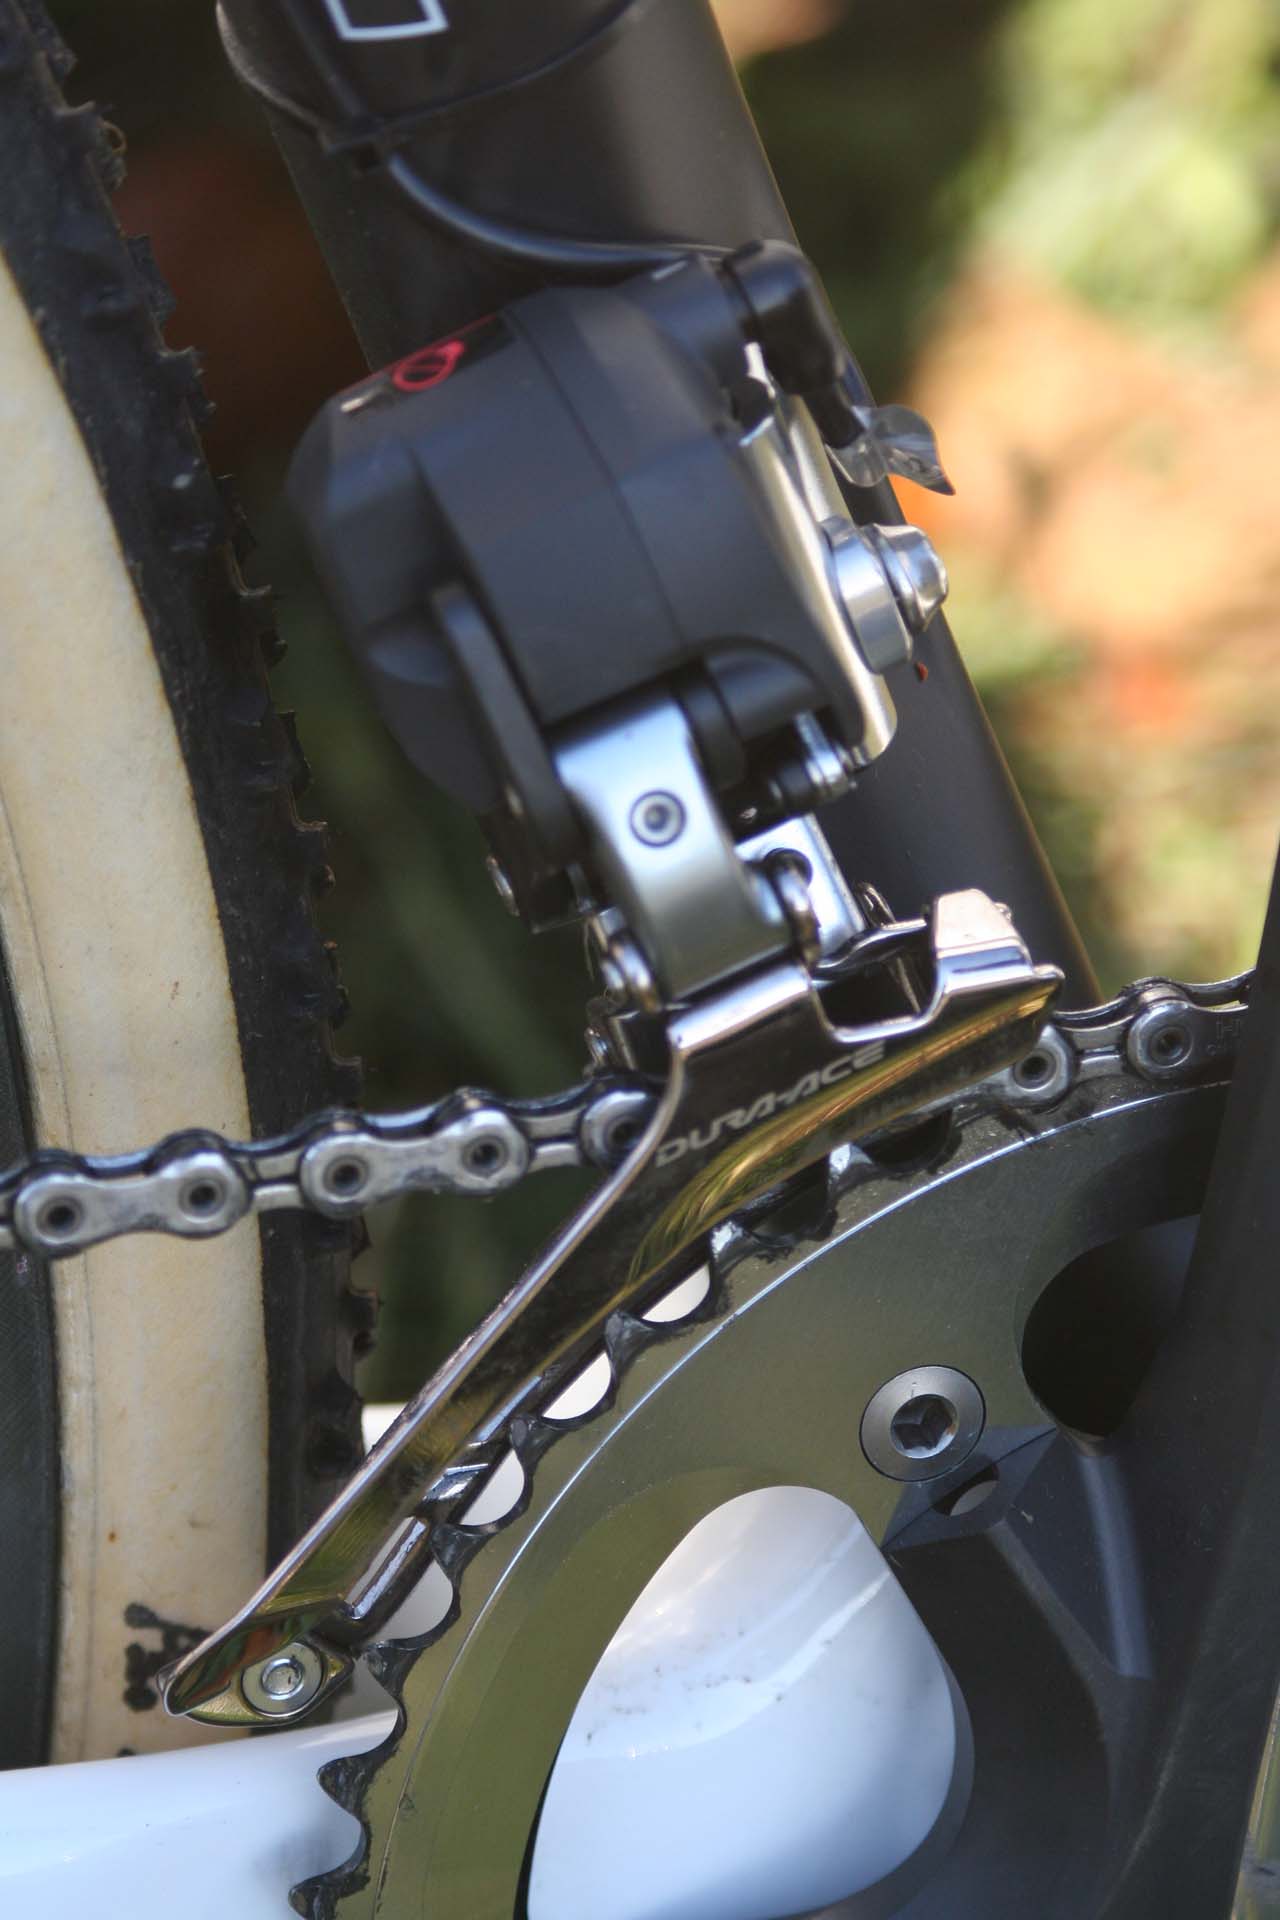 The Di2 front derailleur is bulkier than cable actuated models. © Jamie Mack